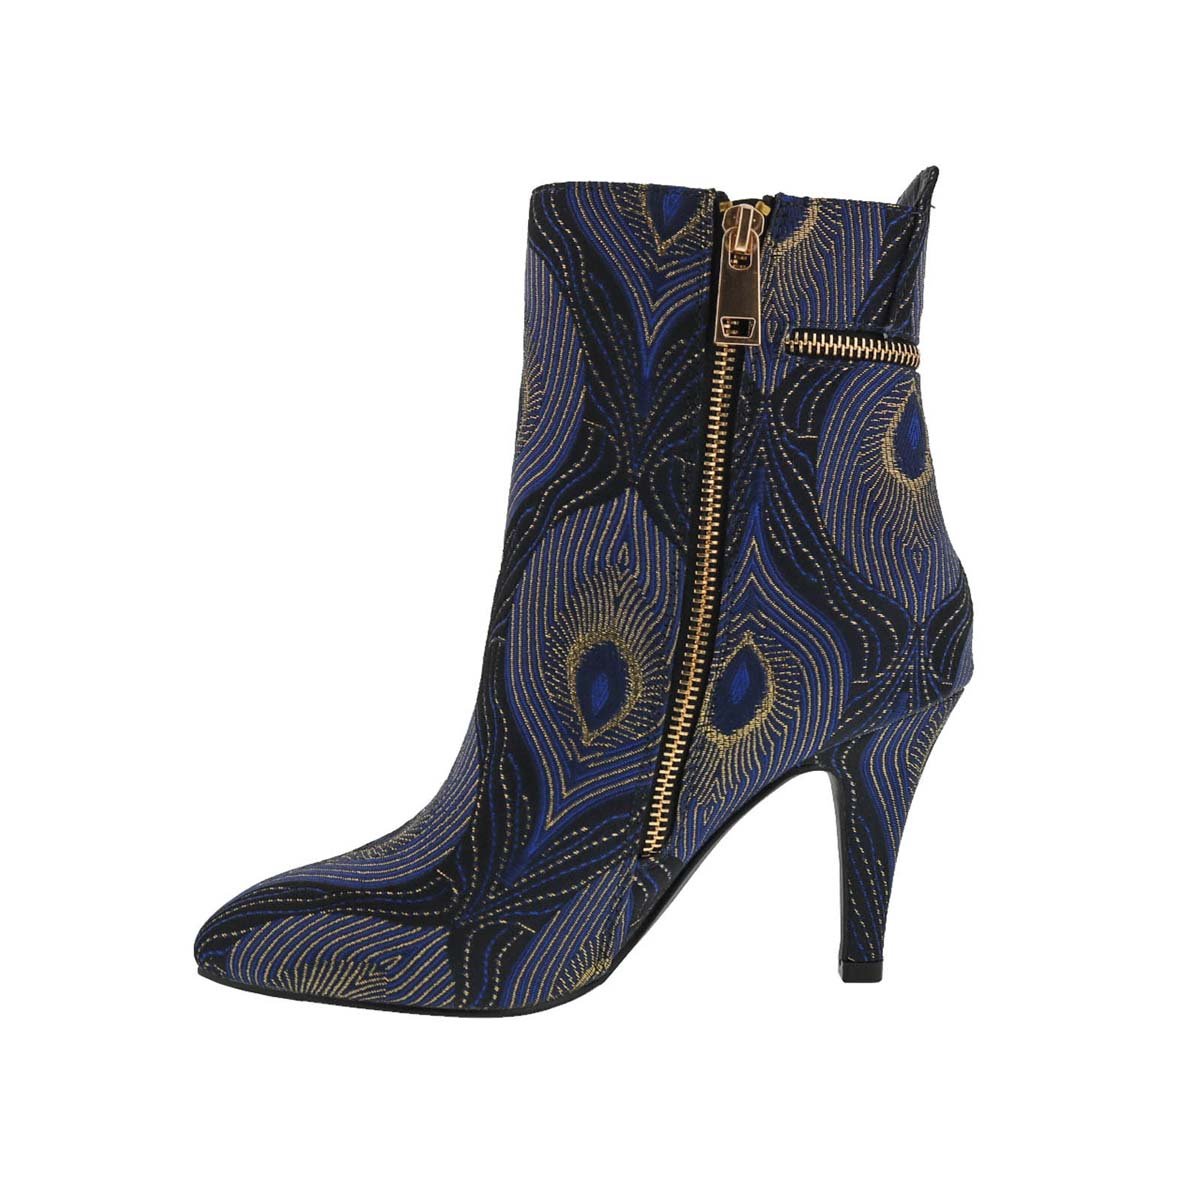 BELLINI CLAUDETTE WOMEN DRESSY ANKLE BOOT IN NAVY GOLD COMBO - TLW Shoes